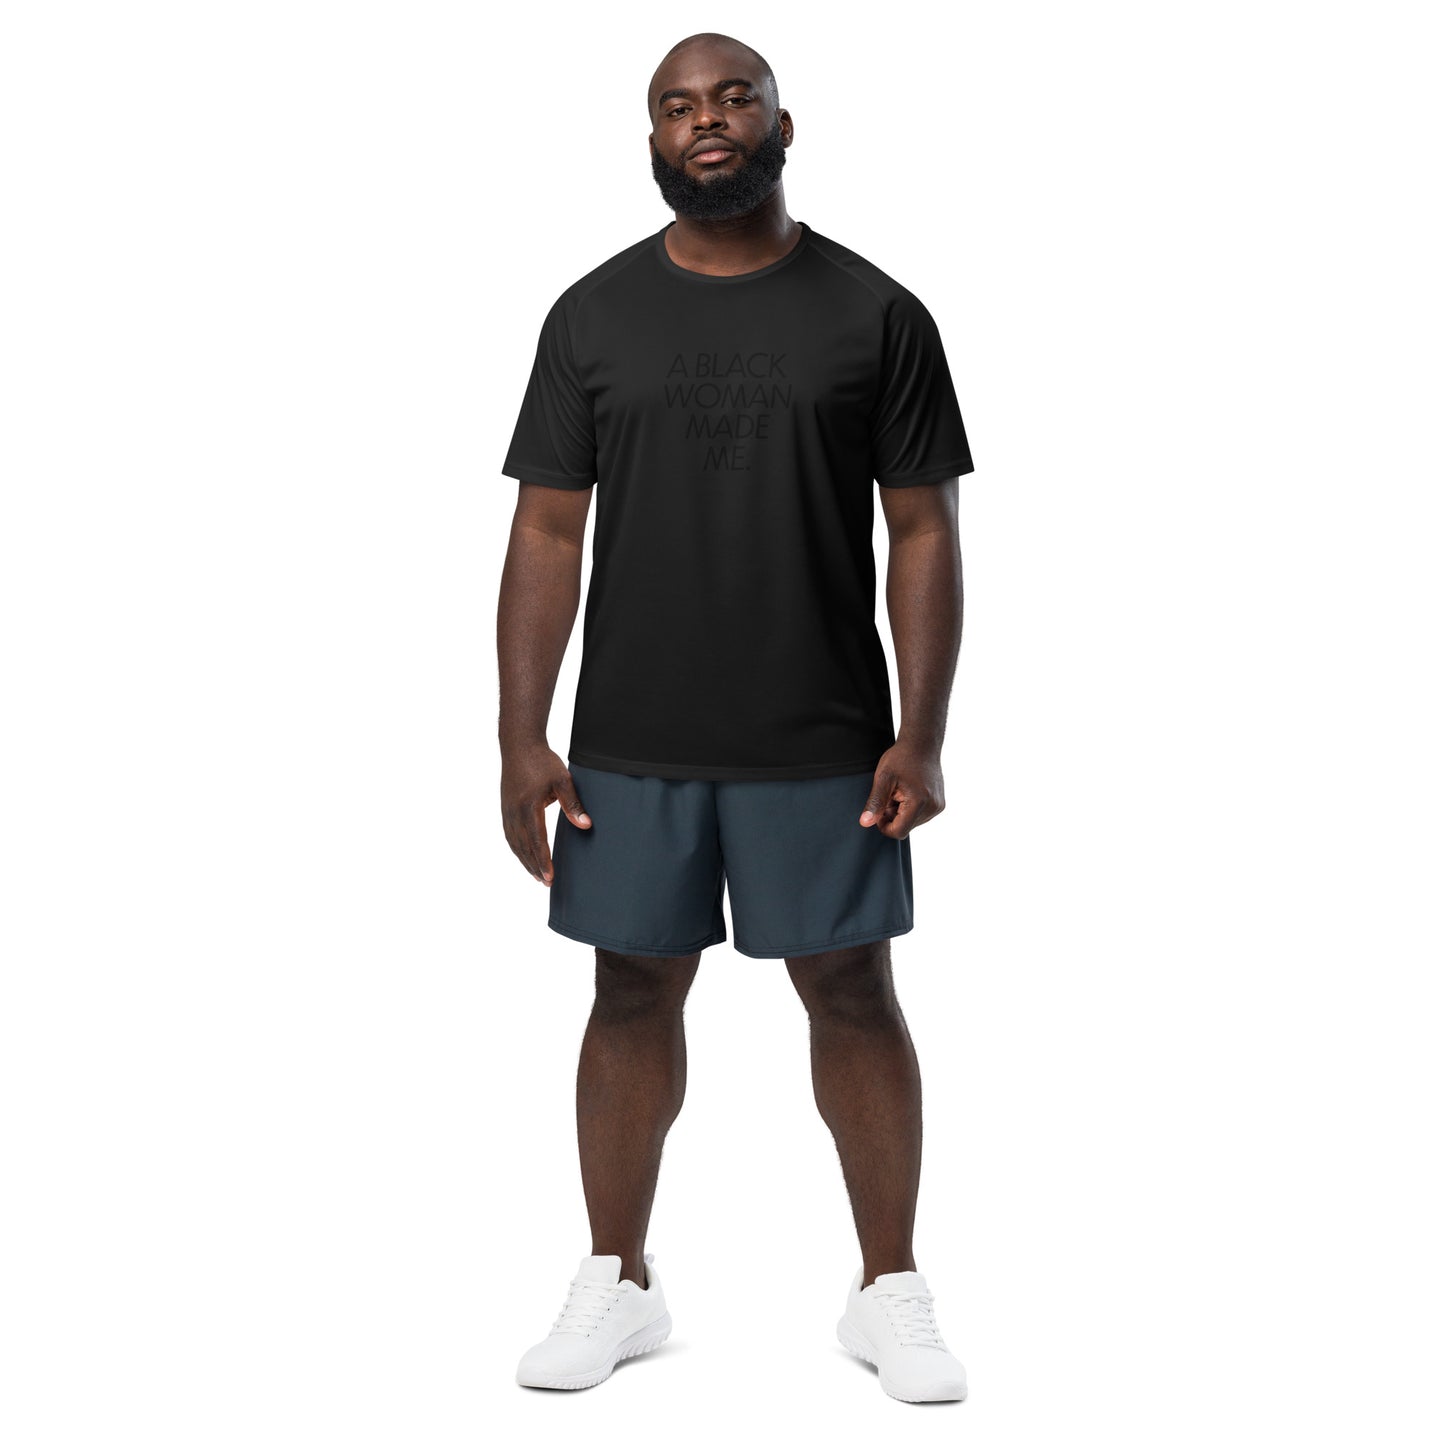 Unisex sports jersey - A Black Woman Made Me